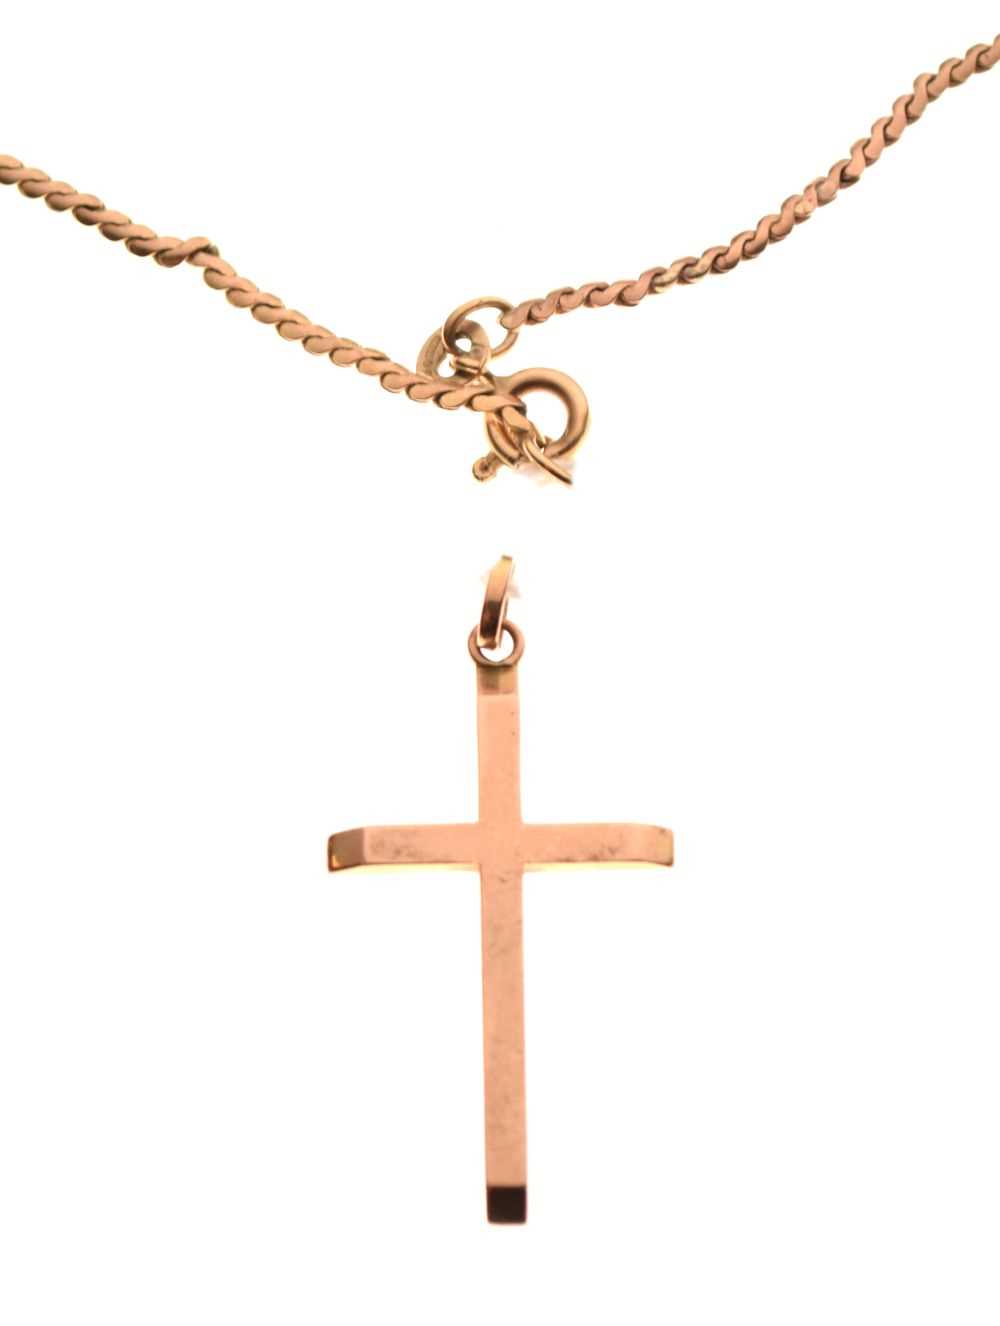 Lot 72 - Yellow metal cross pendant stamped '9k', and a 9ct gold chain (a/f)